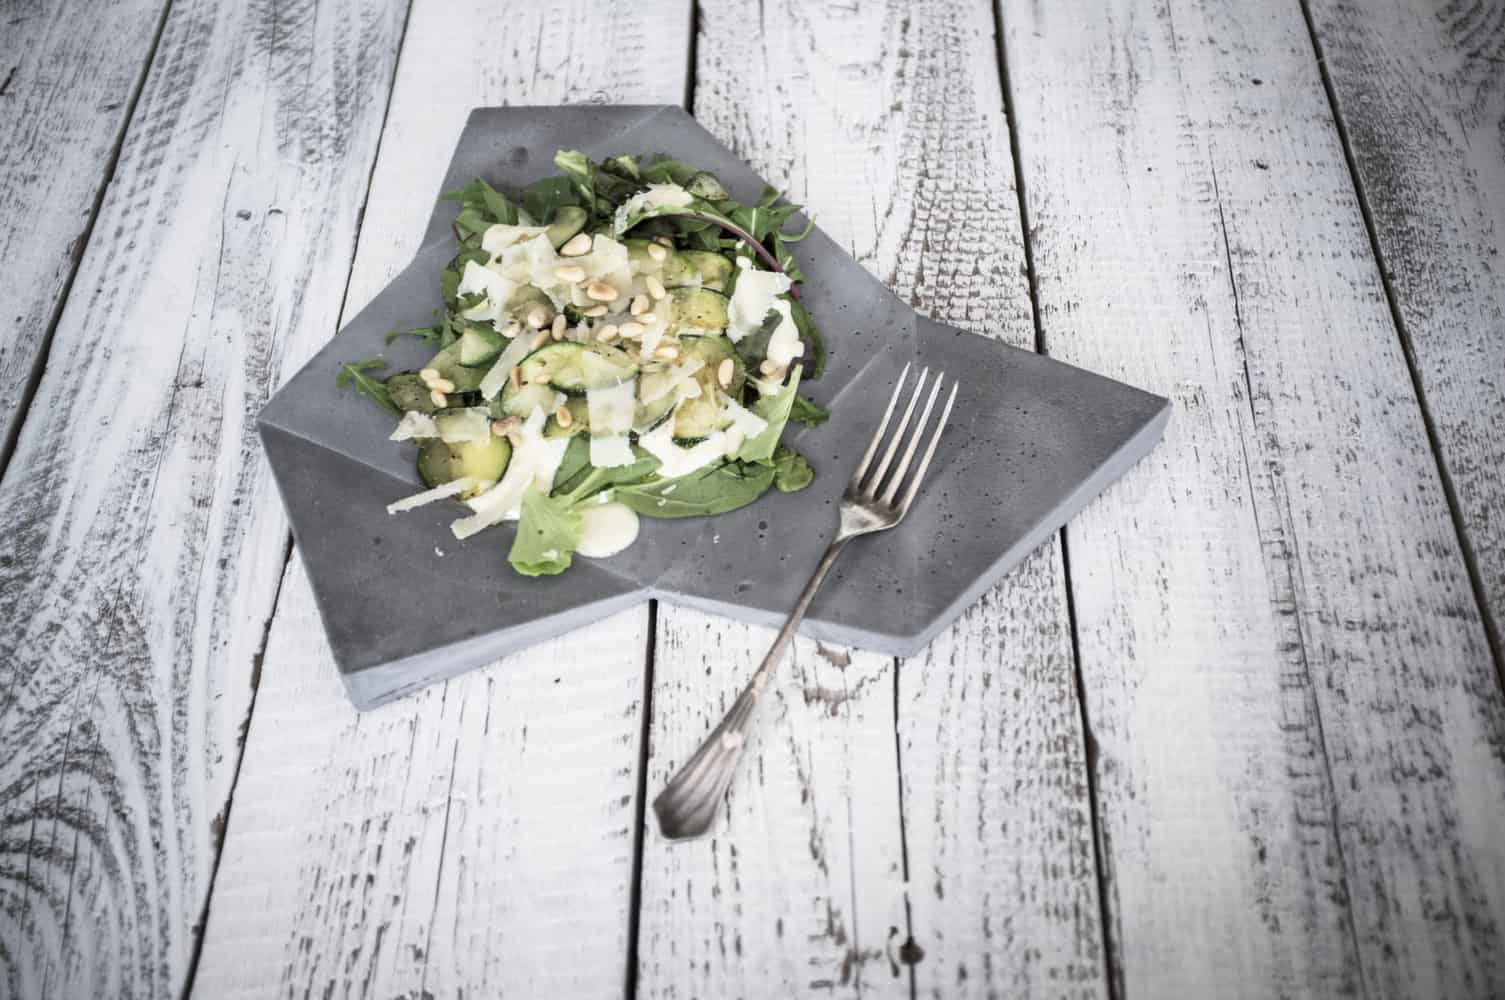 Concrete Tableware for Tasty Looking Meals